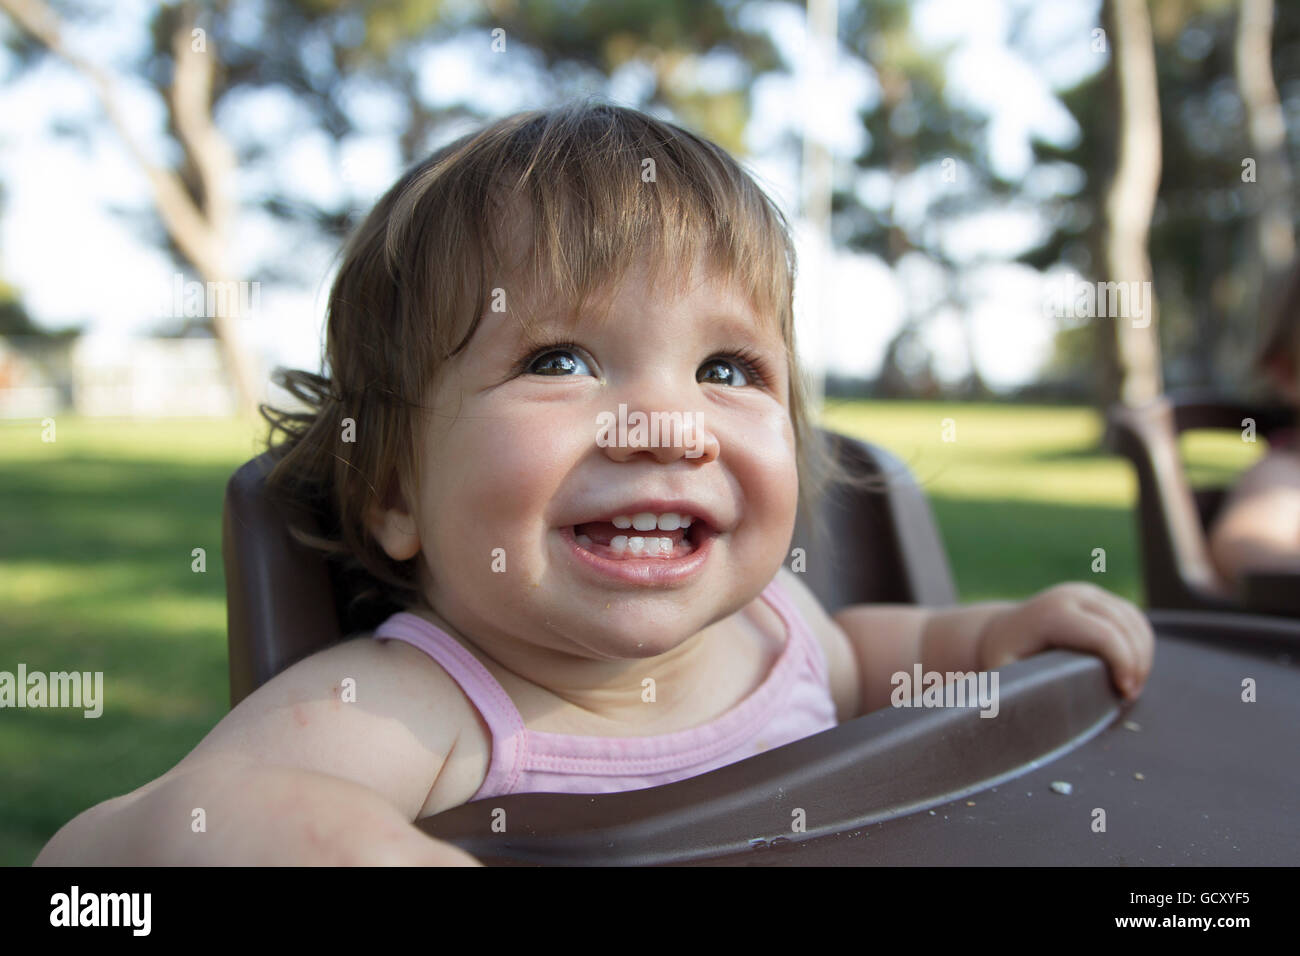 happy baby enjoying in park waiting in feeding chair for food Stock Photo